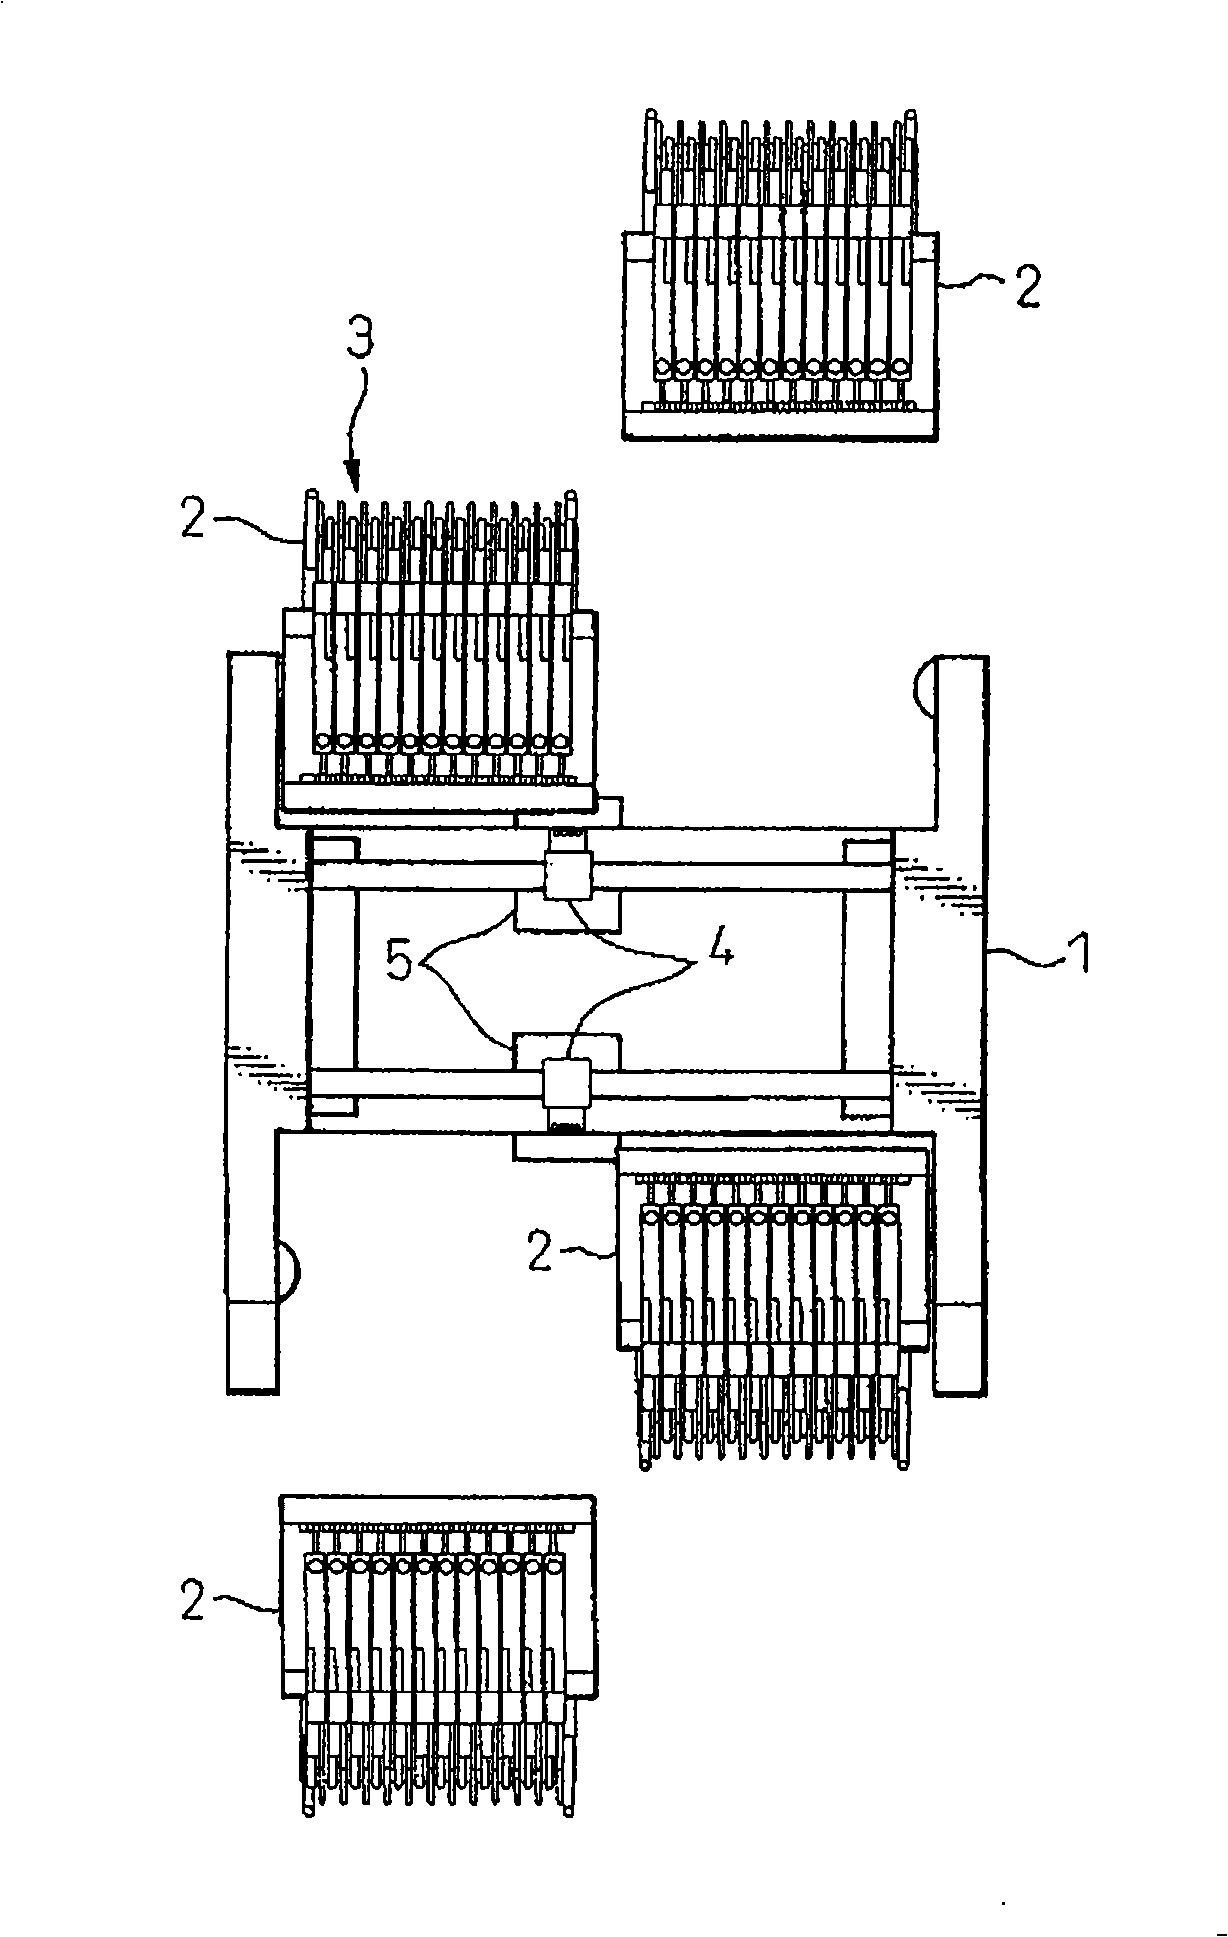 Operation support system of element assembling device, recognition method of element order and recognition method of Cassette holder order